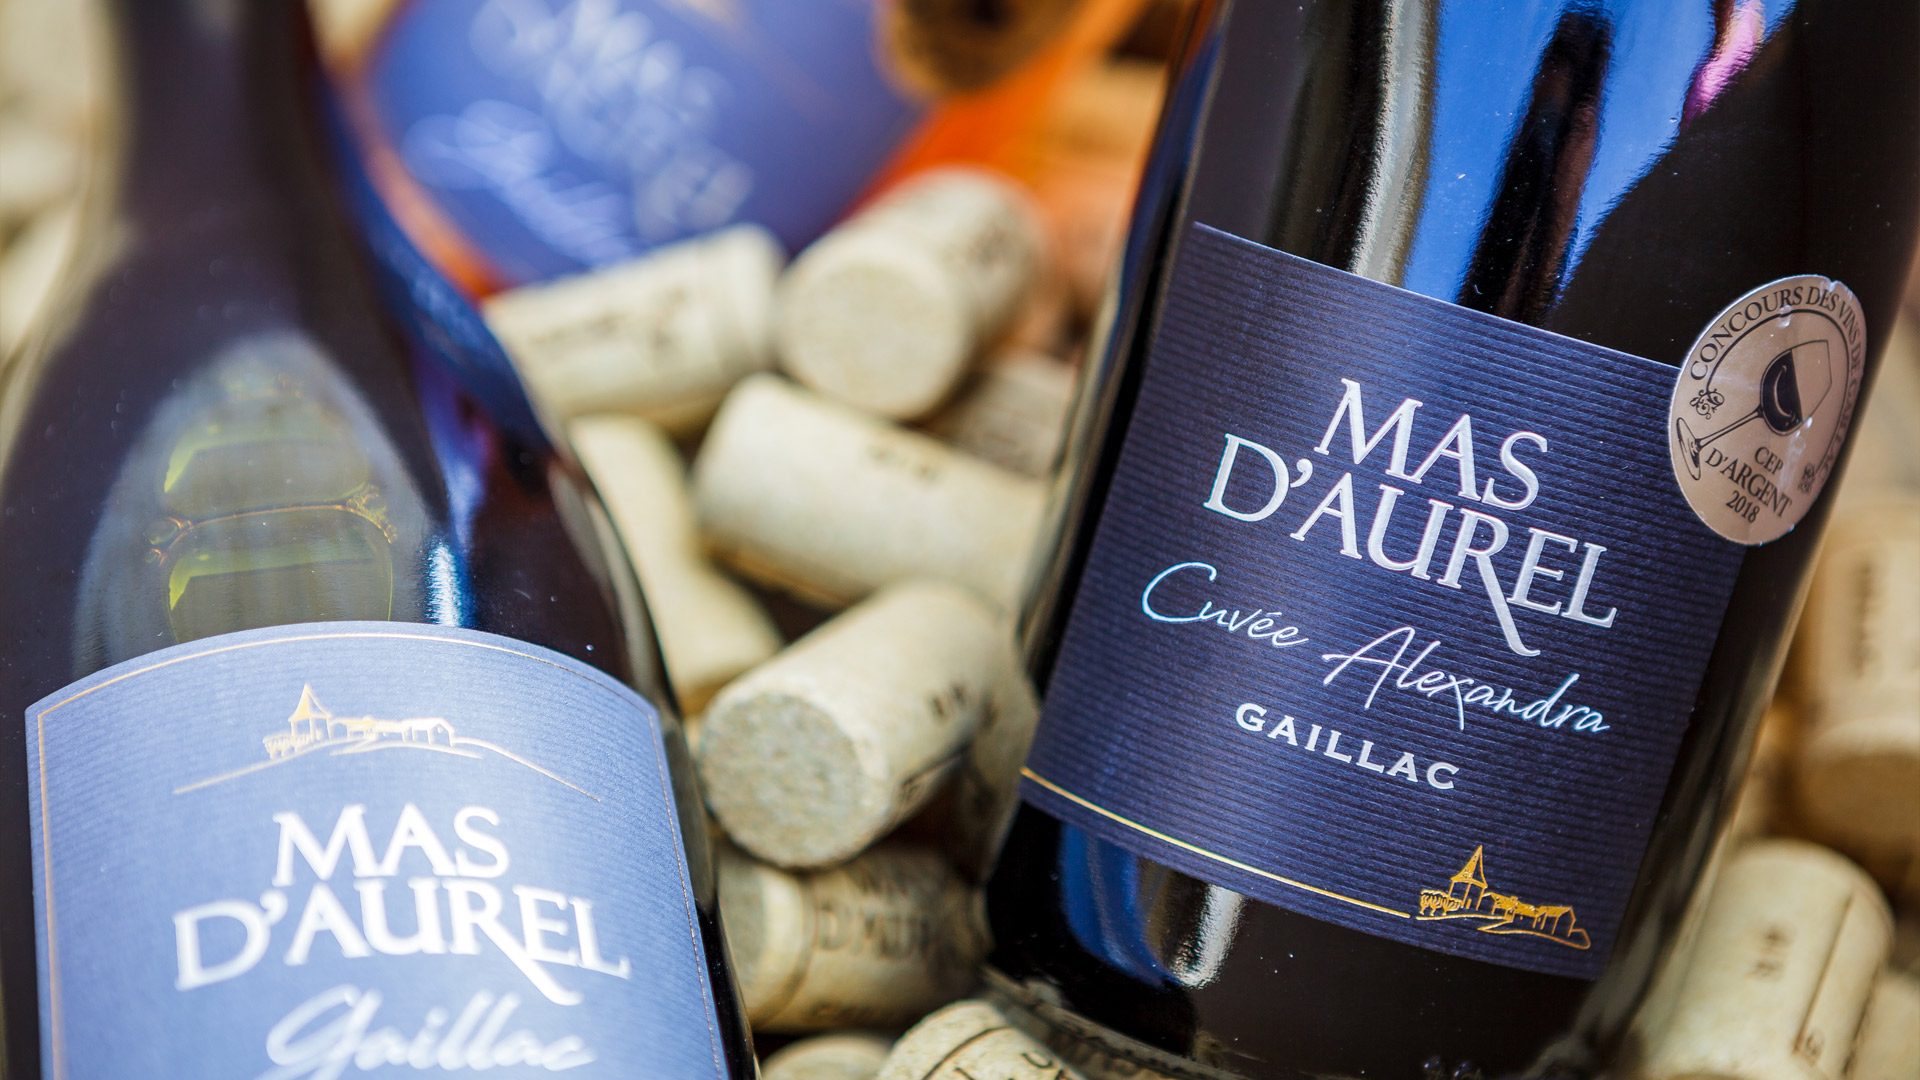 Very close to Albi, the thousand-year-old vineyard of Gaillac - visit the winegrowers